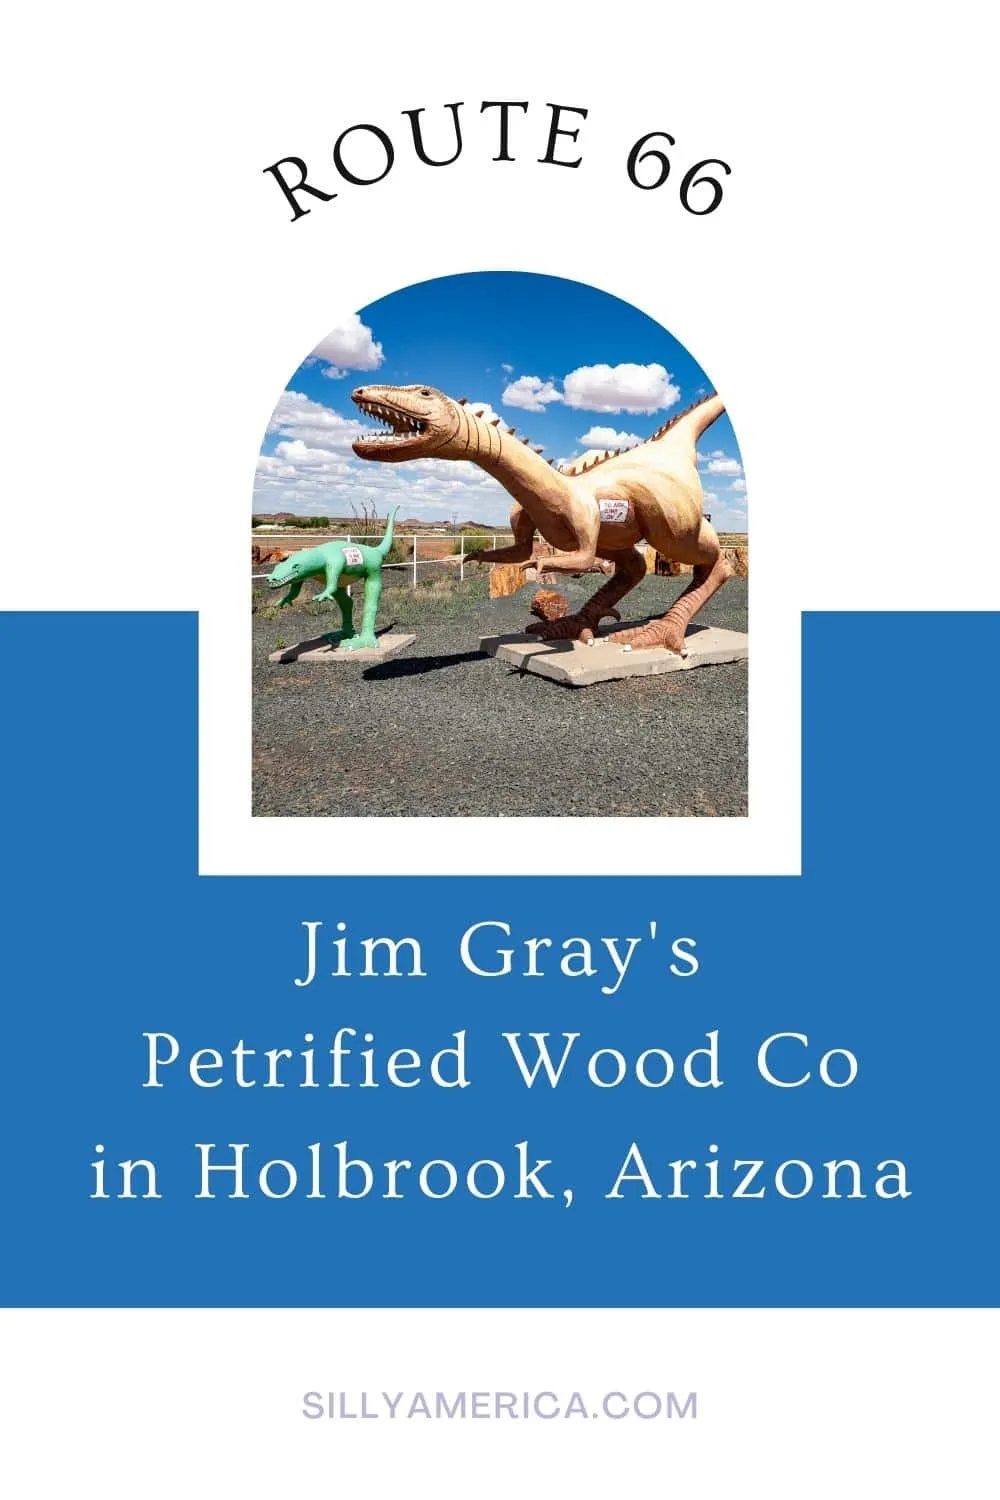 You can't drive Route 66 in Arizona without passing by a petrified wood shop or two, each trying to outdo each other with weirder and bigger roadside attractions and gimmicks that catch the eye of passersby. One of the best of these Route 66 rock shops you can find is Jim Gray's Petrified Wood Co in Holbrook, Arizona. Look for the dinosaurs, the 2.9 million year old alligator, and impressive selection of natural souvenirs. #Route66 #Route66RoadTrip #ArizonaRoadTrip #Arizona #RoadsideAttraction